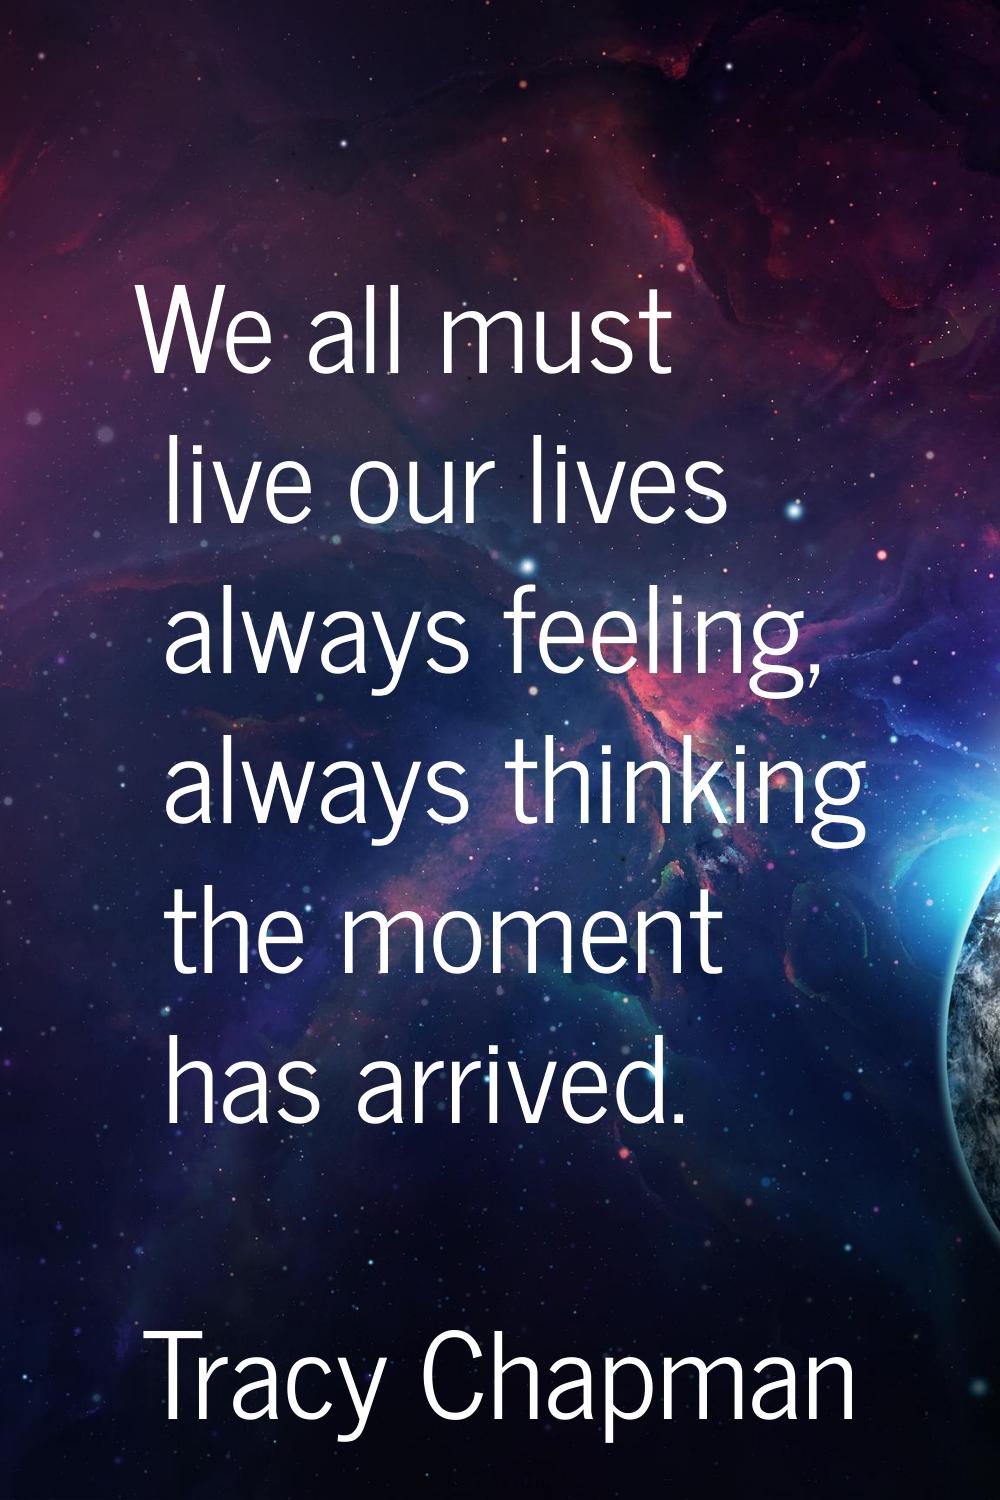 We all must live our lives always feeling, always thinking the moment has arrived.